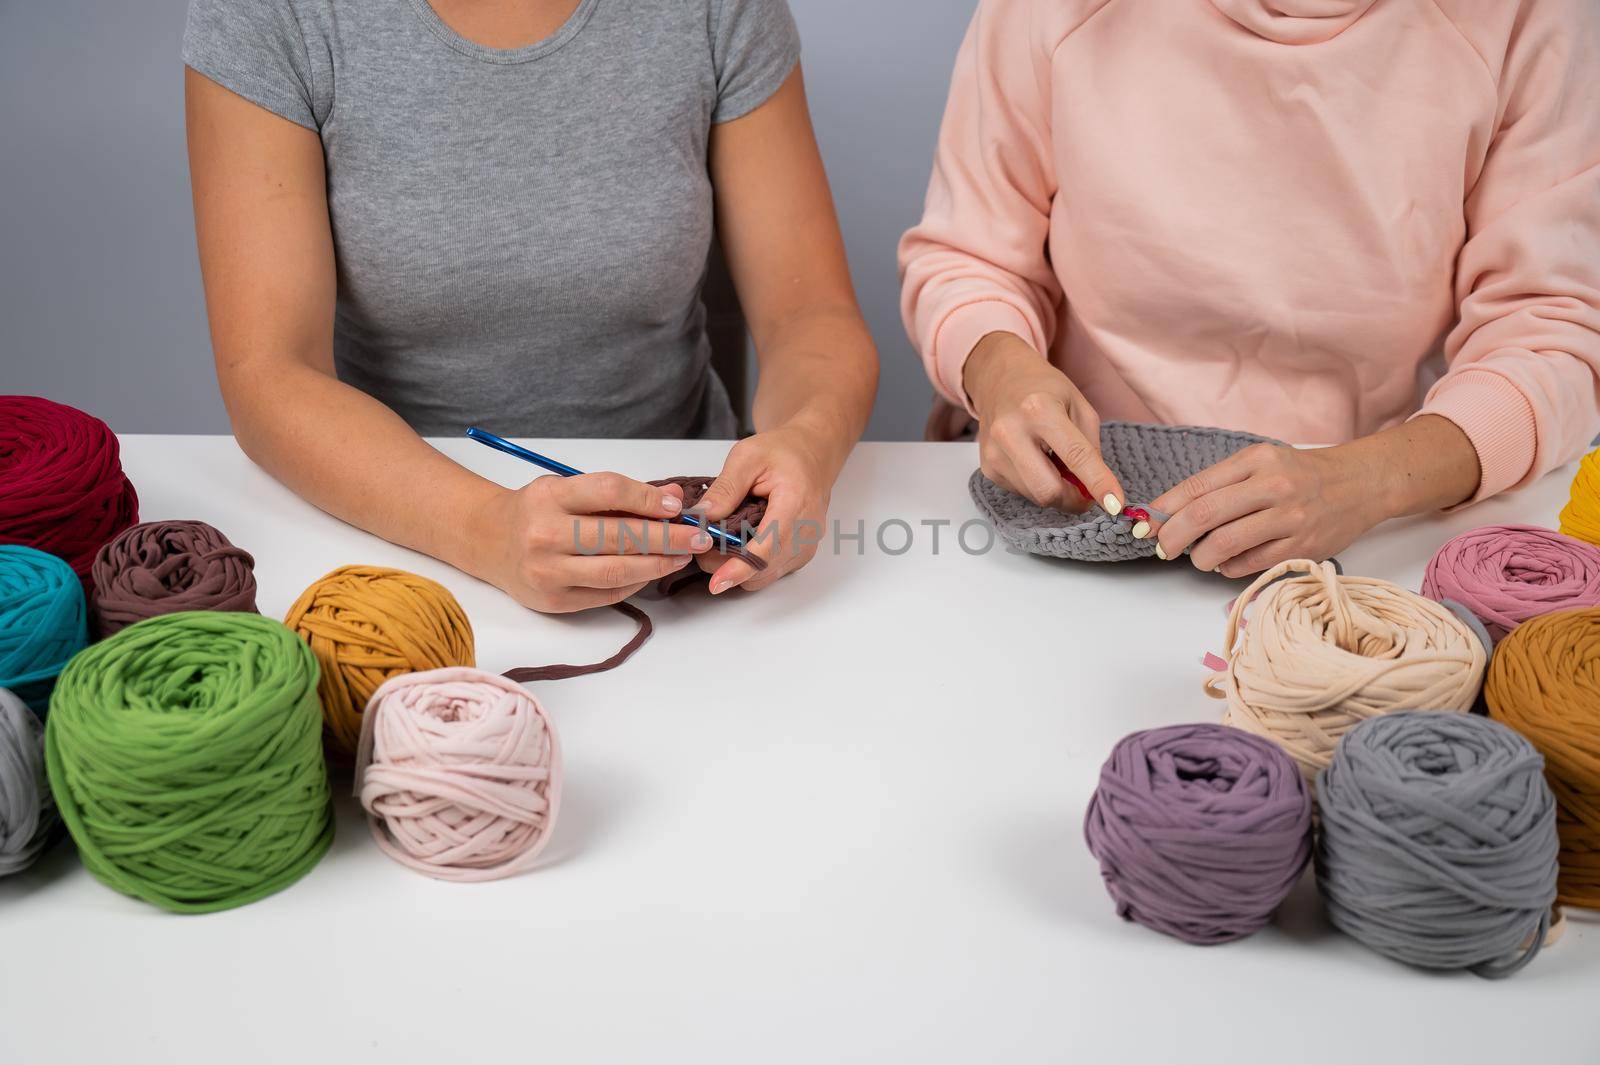 A woman teaches her friend needlework. Two women are crocheting a basket of cotton yarn. by mrwed54